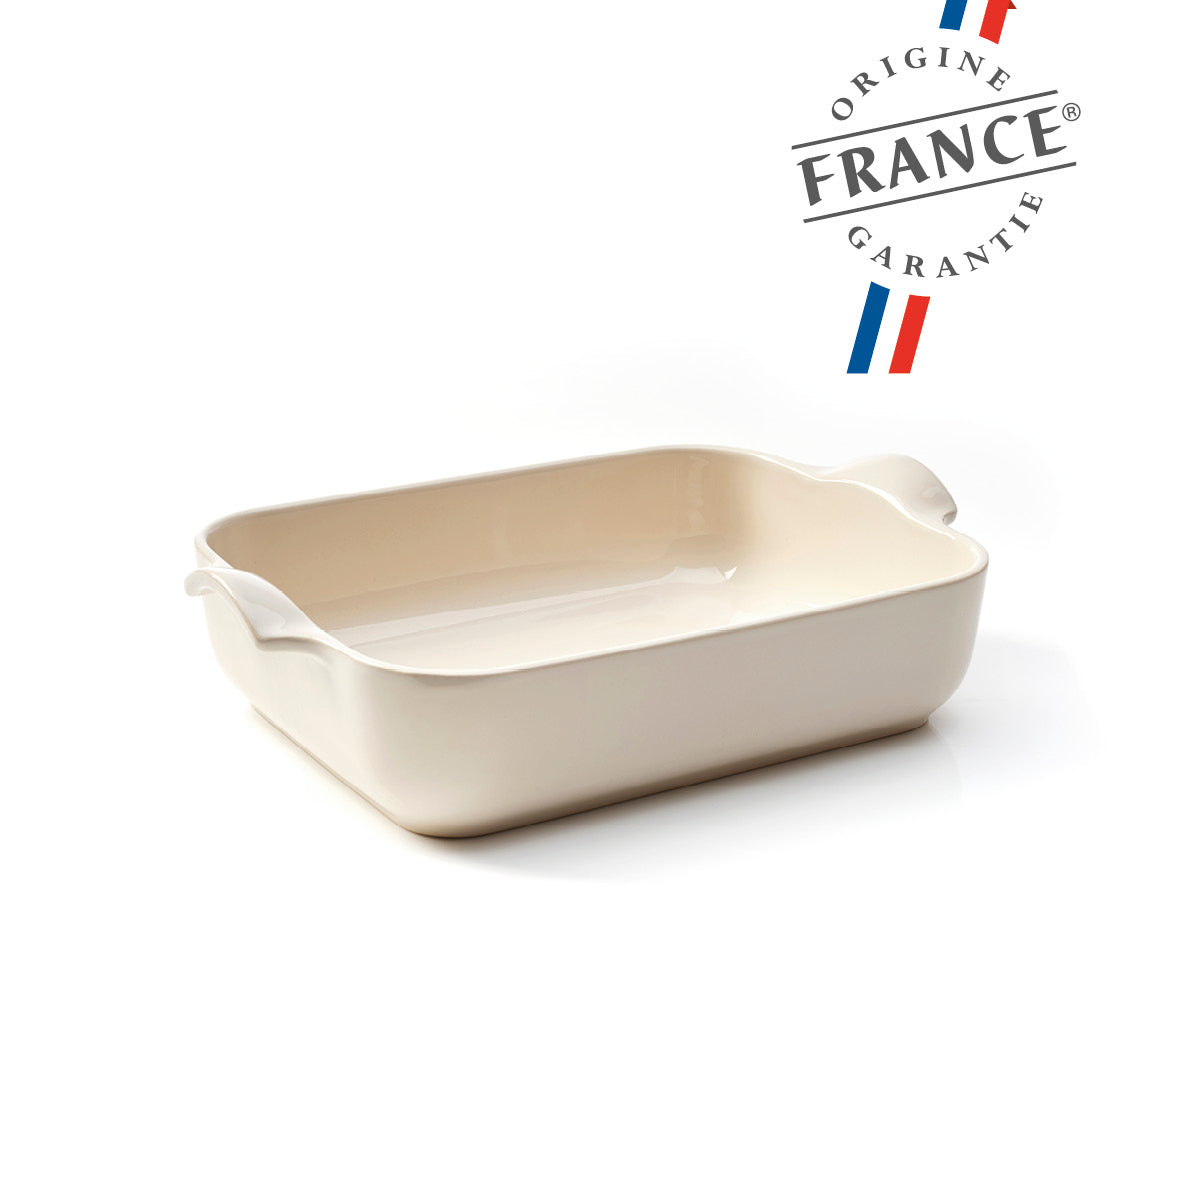 Ceramic oven dish - Made in France - 1L - 2-3 people